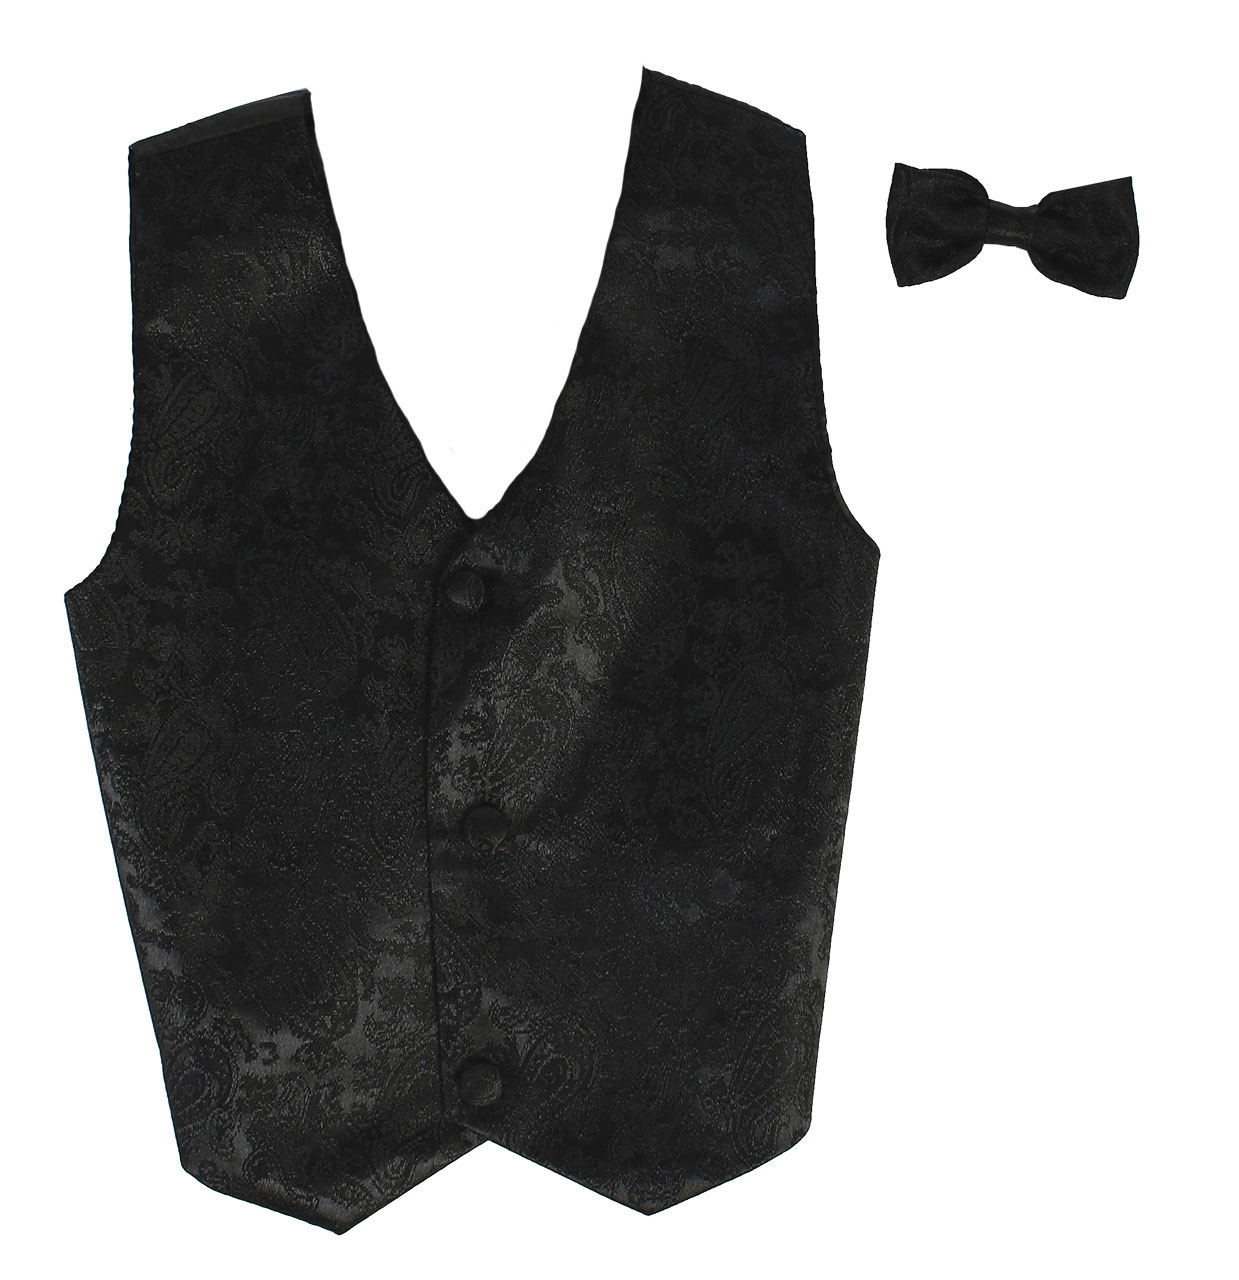 Vest and Clip On Bowtie Set - Black Paisley (Old Style) -